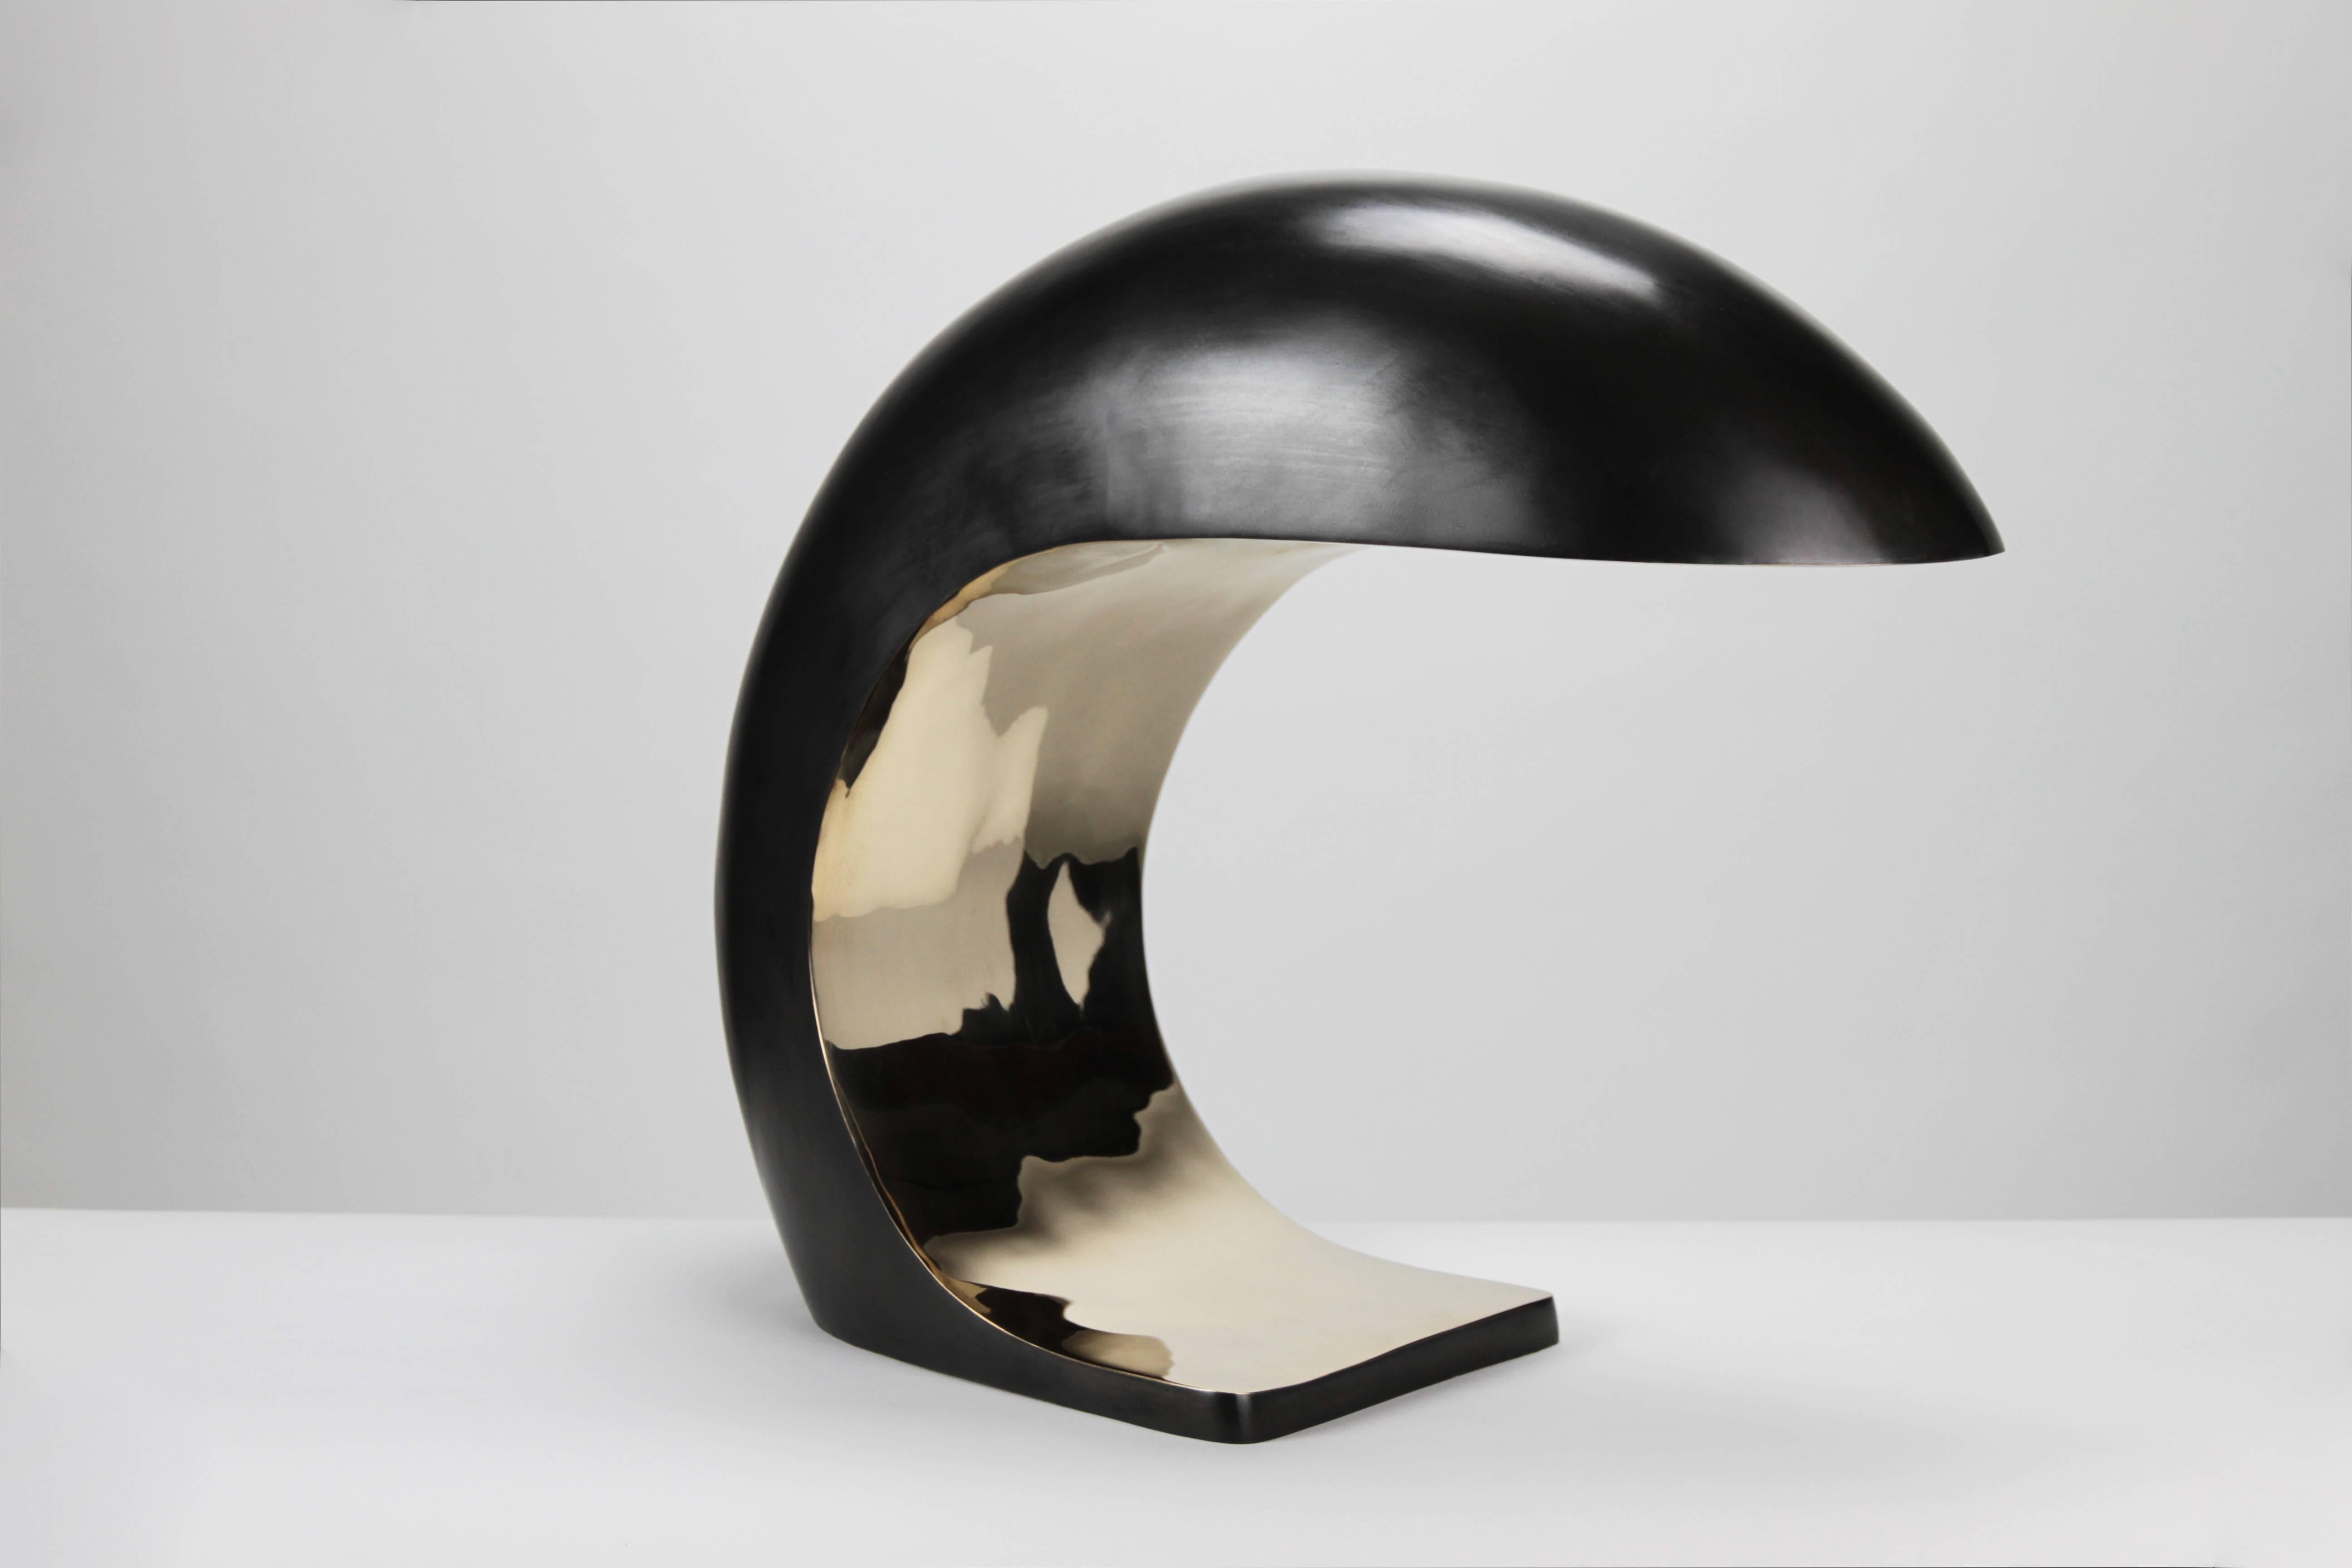 (Imperfect model - some texture and indentations on the high polished area. see photos.

The NAUTILUS lamp is inspired by midcentury Italian design.
It is cast bronze and weighs up to 28 pounds. The outer shell has a blackened patina and the face is